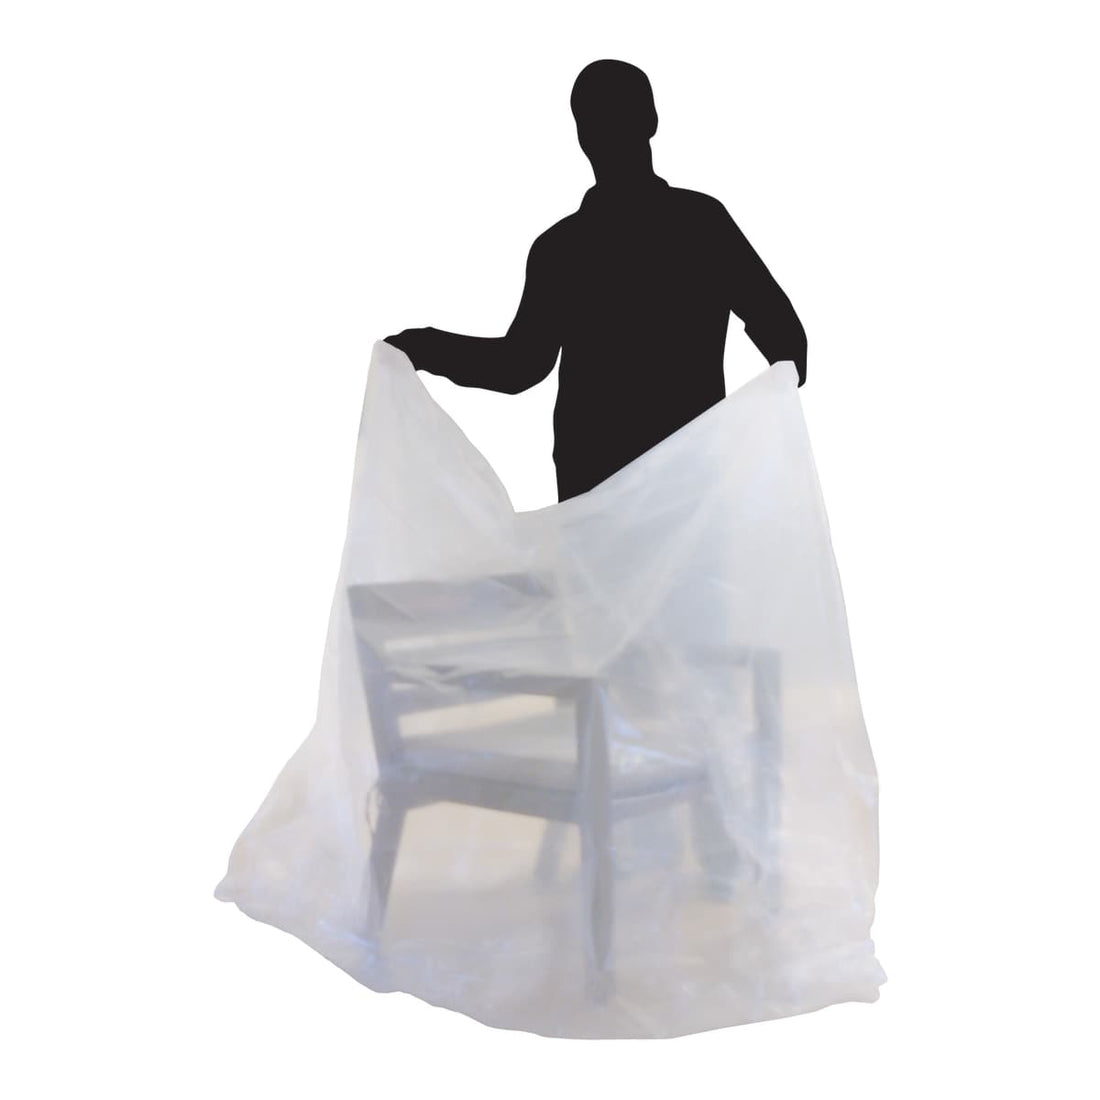 POLYPROPYLENE TRANSPARENT POLYPROPYLENE PROTECTION COVER FOR CHAIR OR CHAIR L130xD110CM